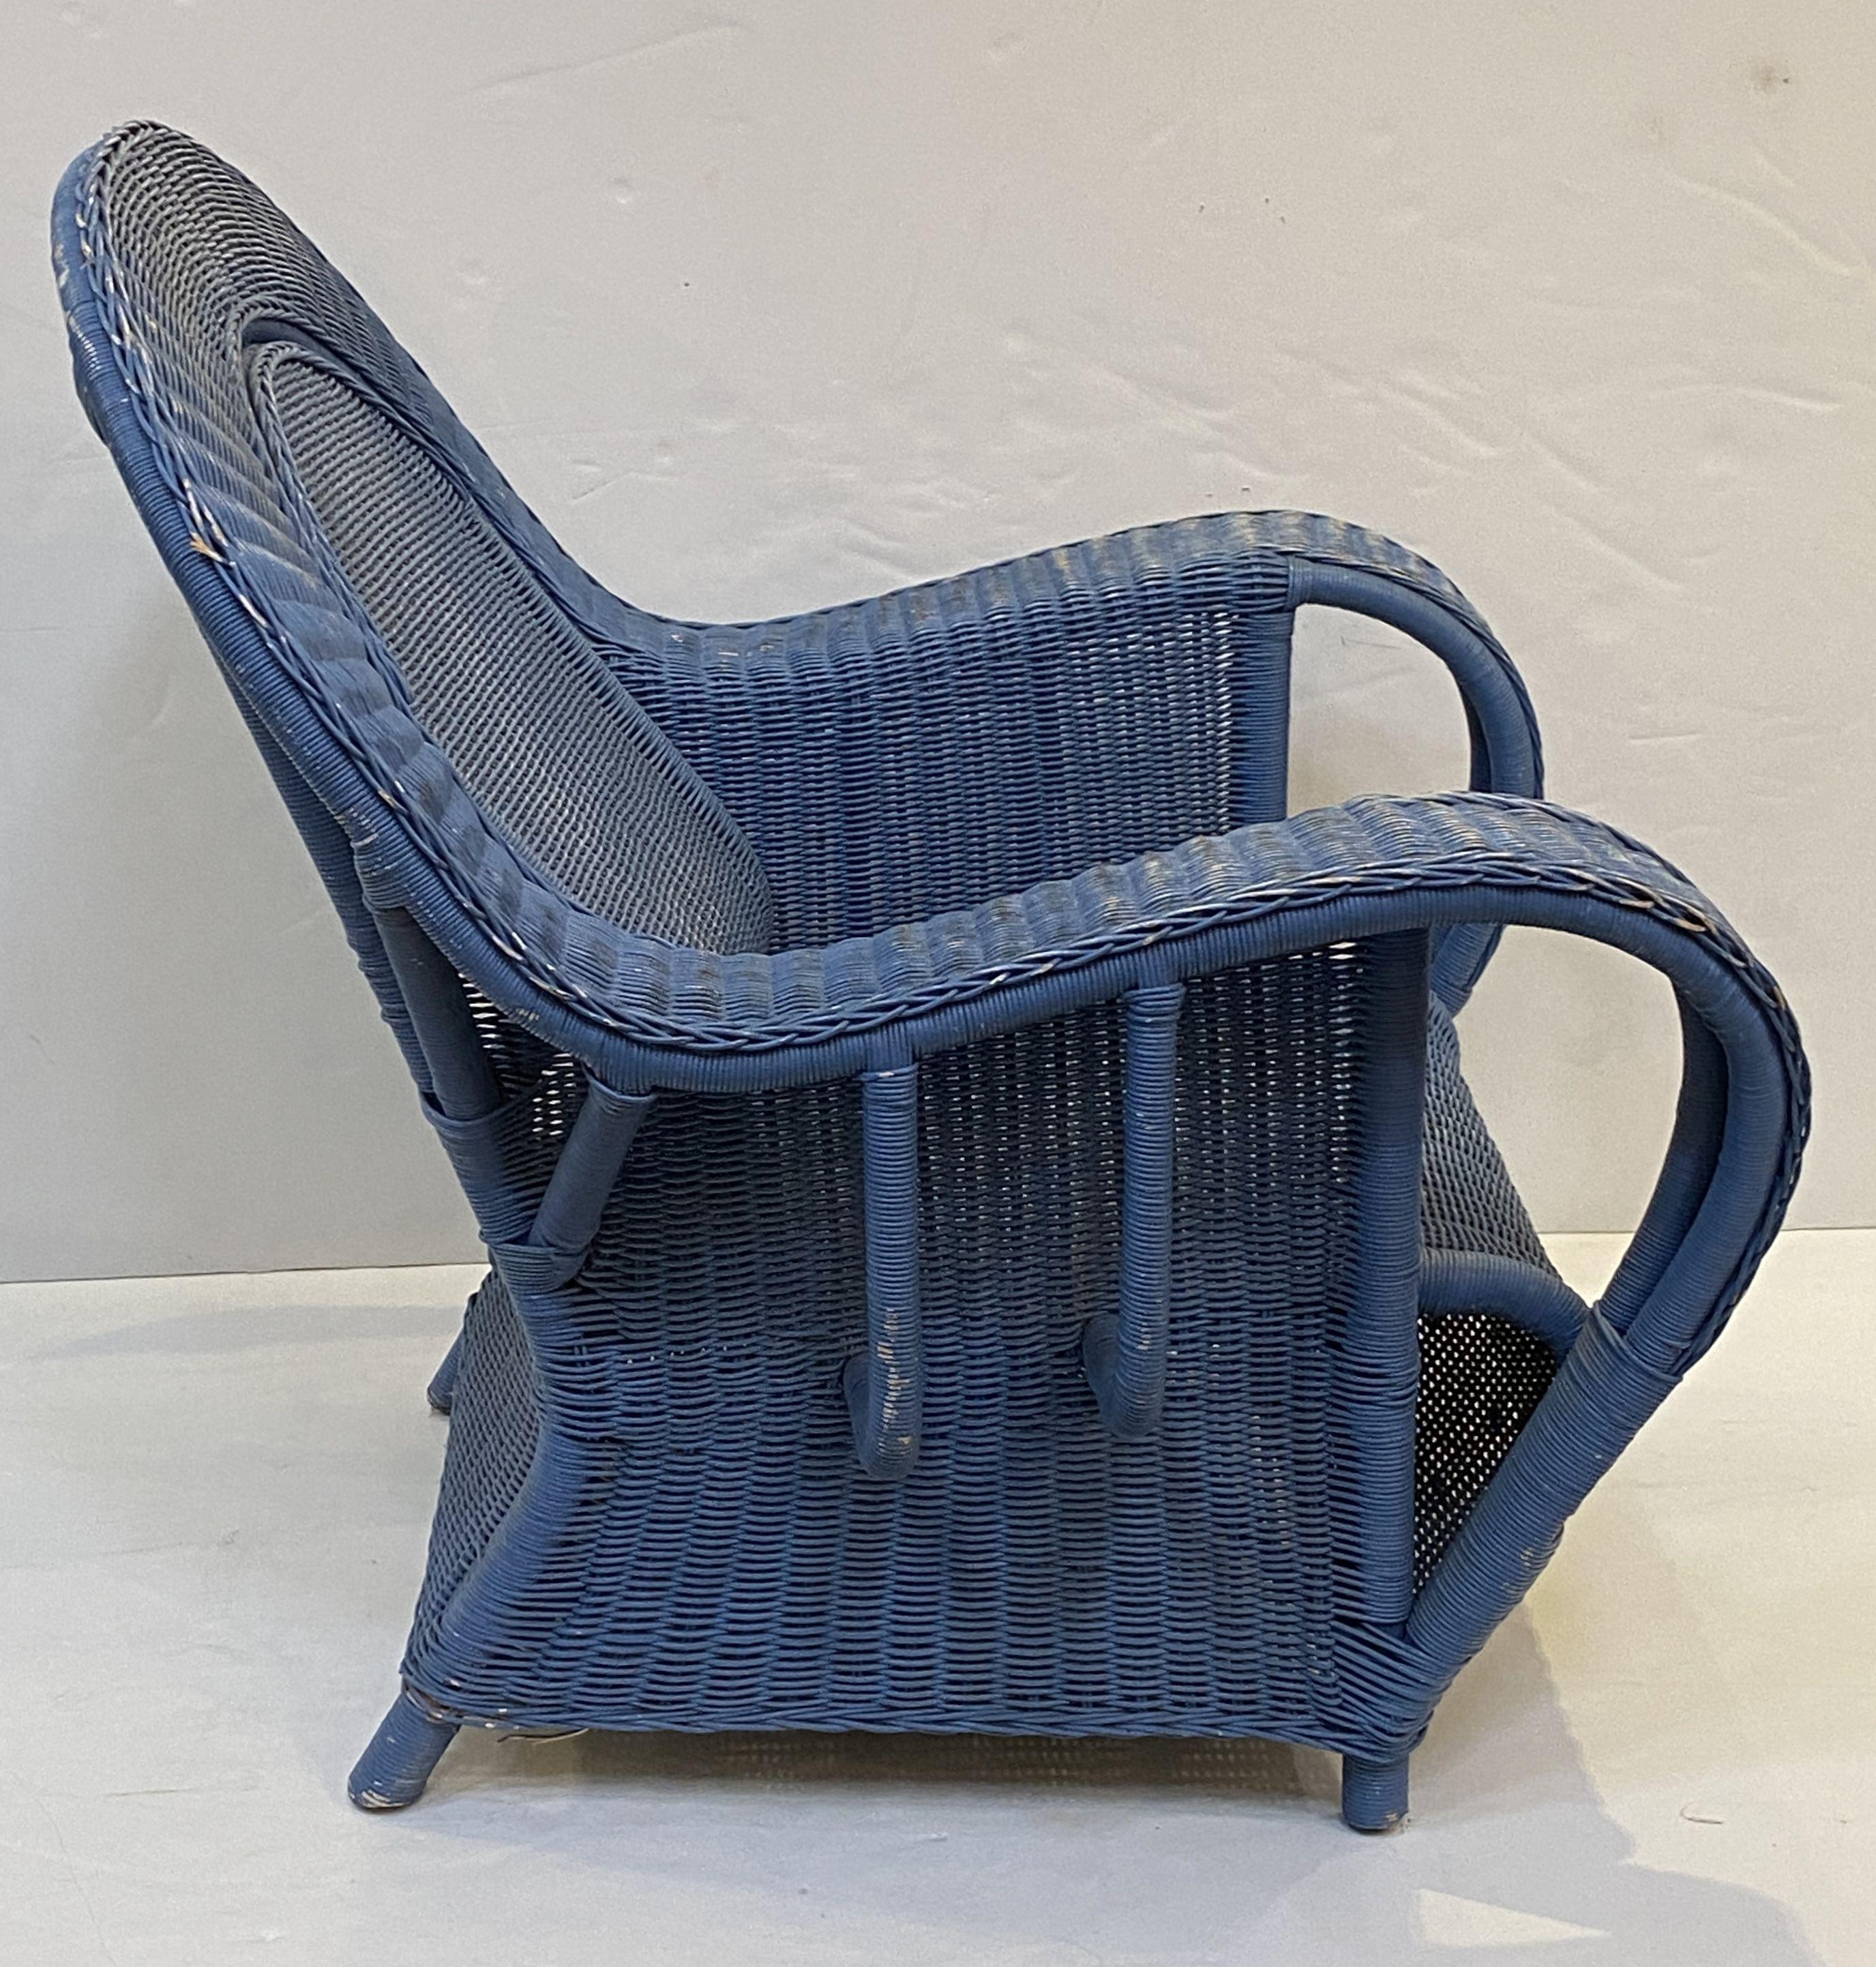 A fine pair of French woven wicker lounge armchairs in the Art Deco style, each chair featuring a beautiful faded blue painted exterior, with scroll back and arms, comfortable seat, and resting on a four-legged frame.

Overall dimensions:
H 37 in
W